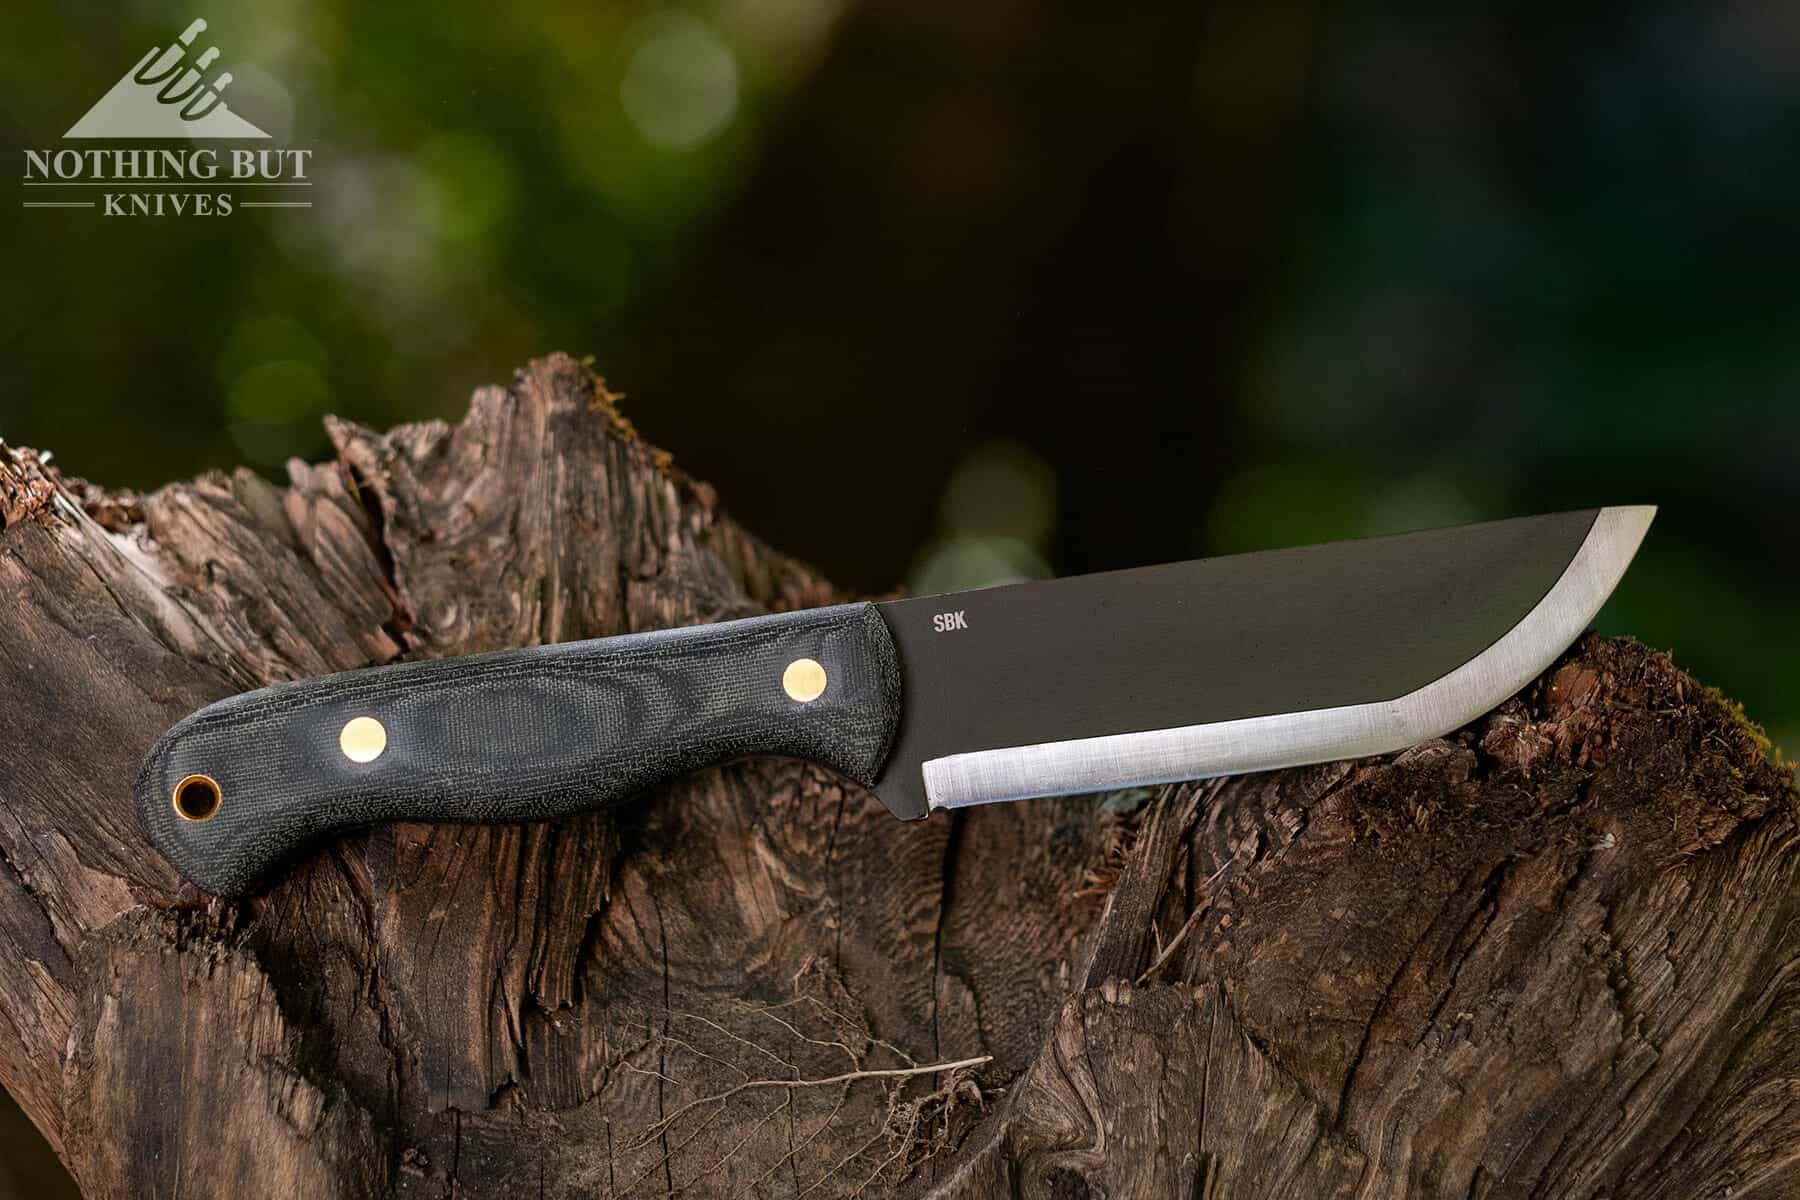 This survival bushcraft knife is better than the Bushlore, but it needs better steel..